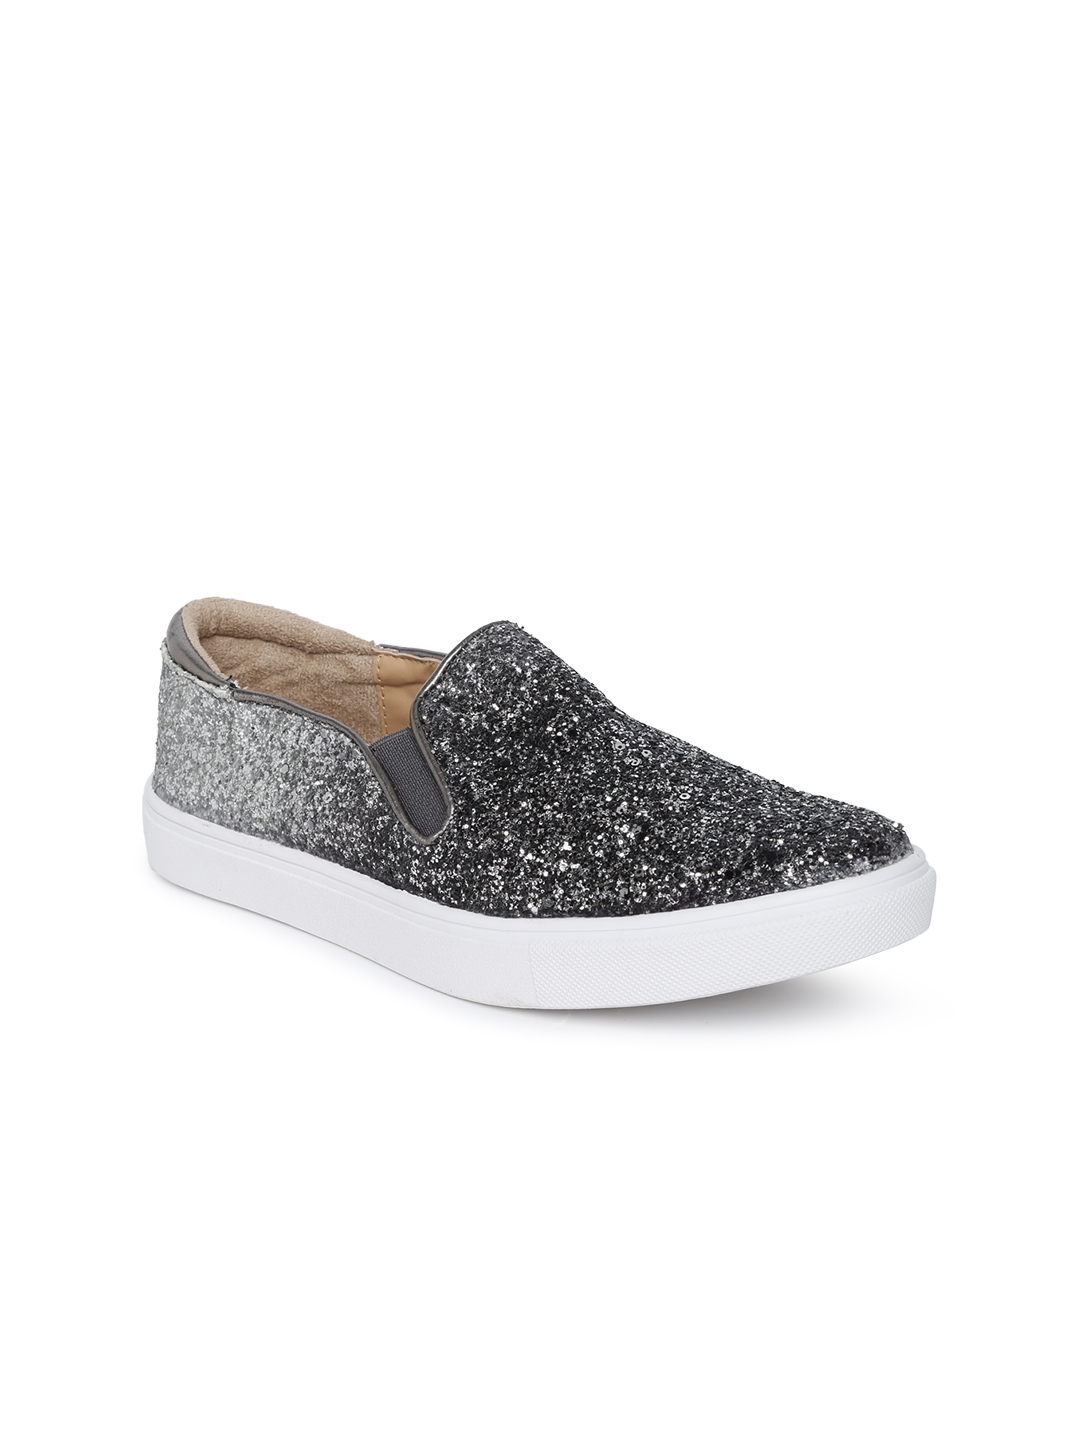 Buy Dune London Women Grey Embellished Sneakers - Casual Shoes for ...